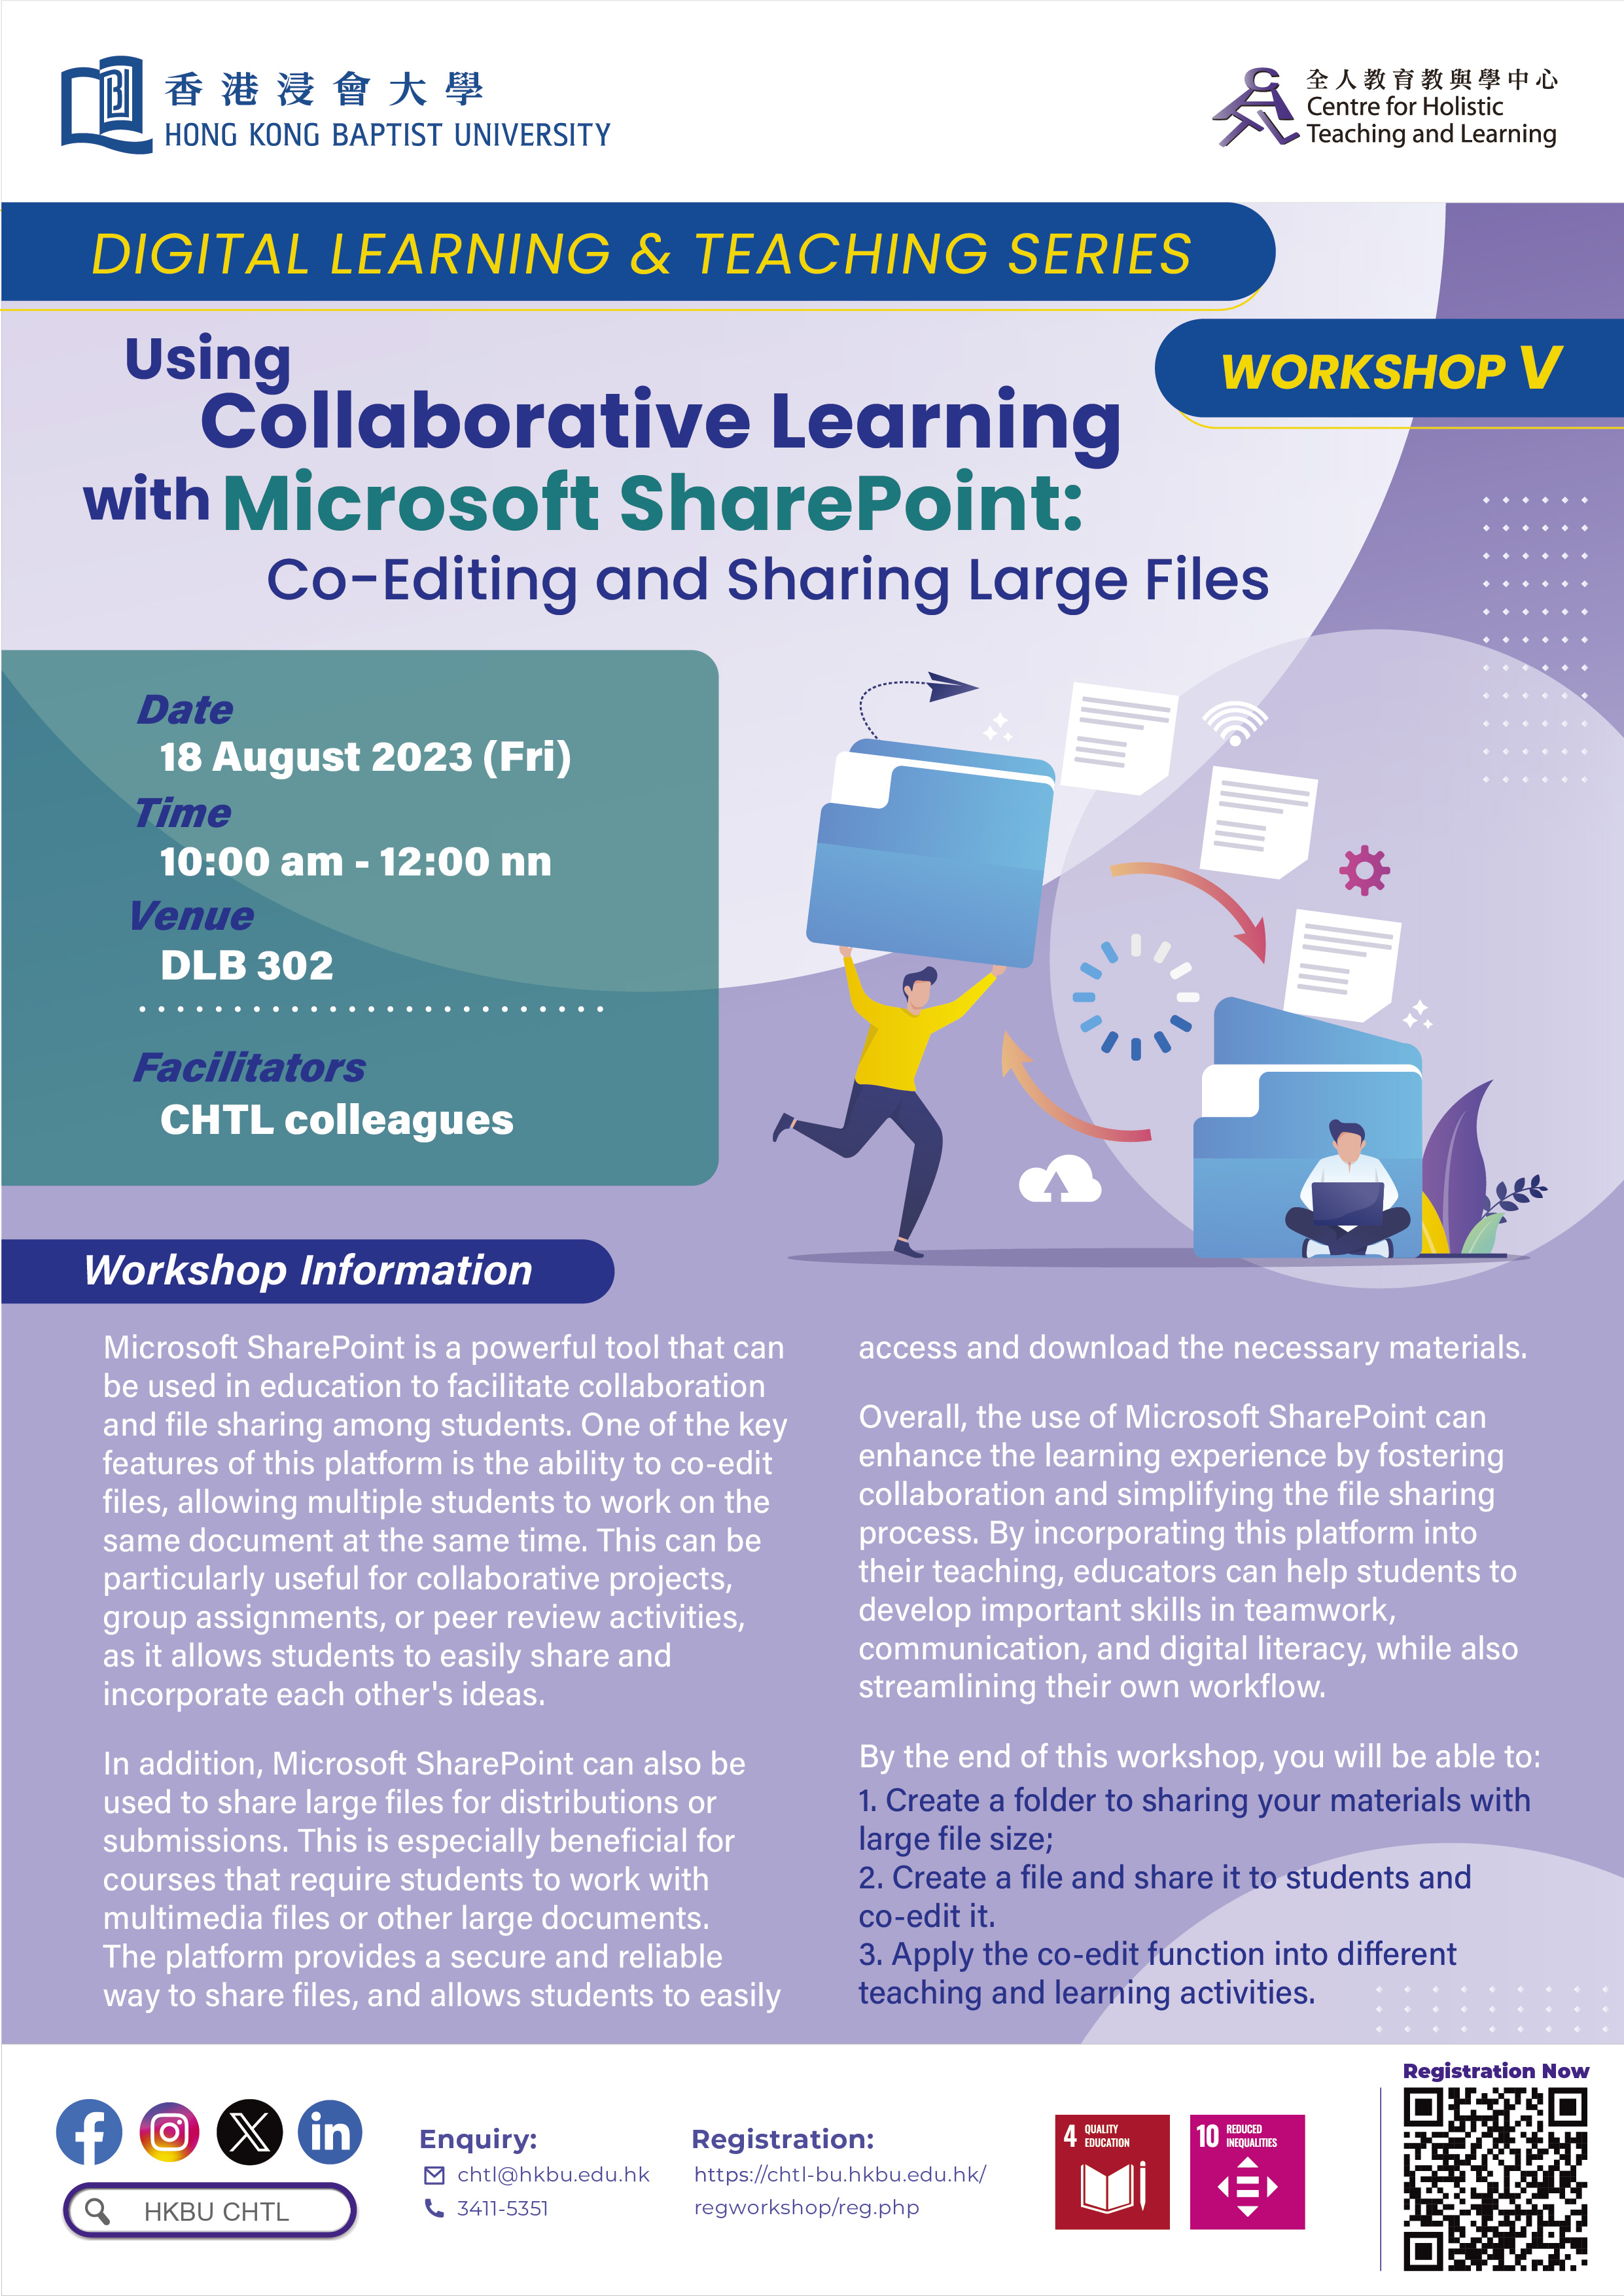 Workshop V: Collaborative Learning with Microsoft SharePoint: Co-Editing and Sharing Large Files